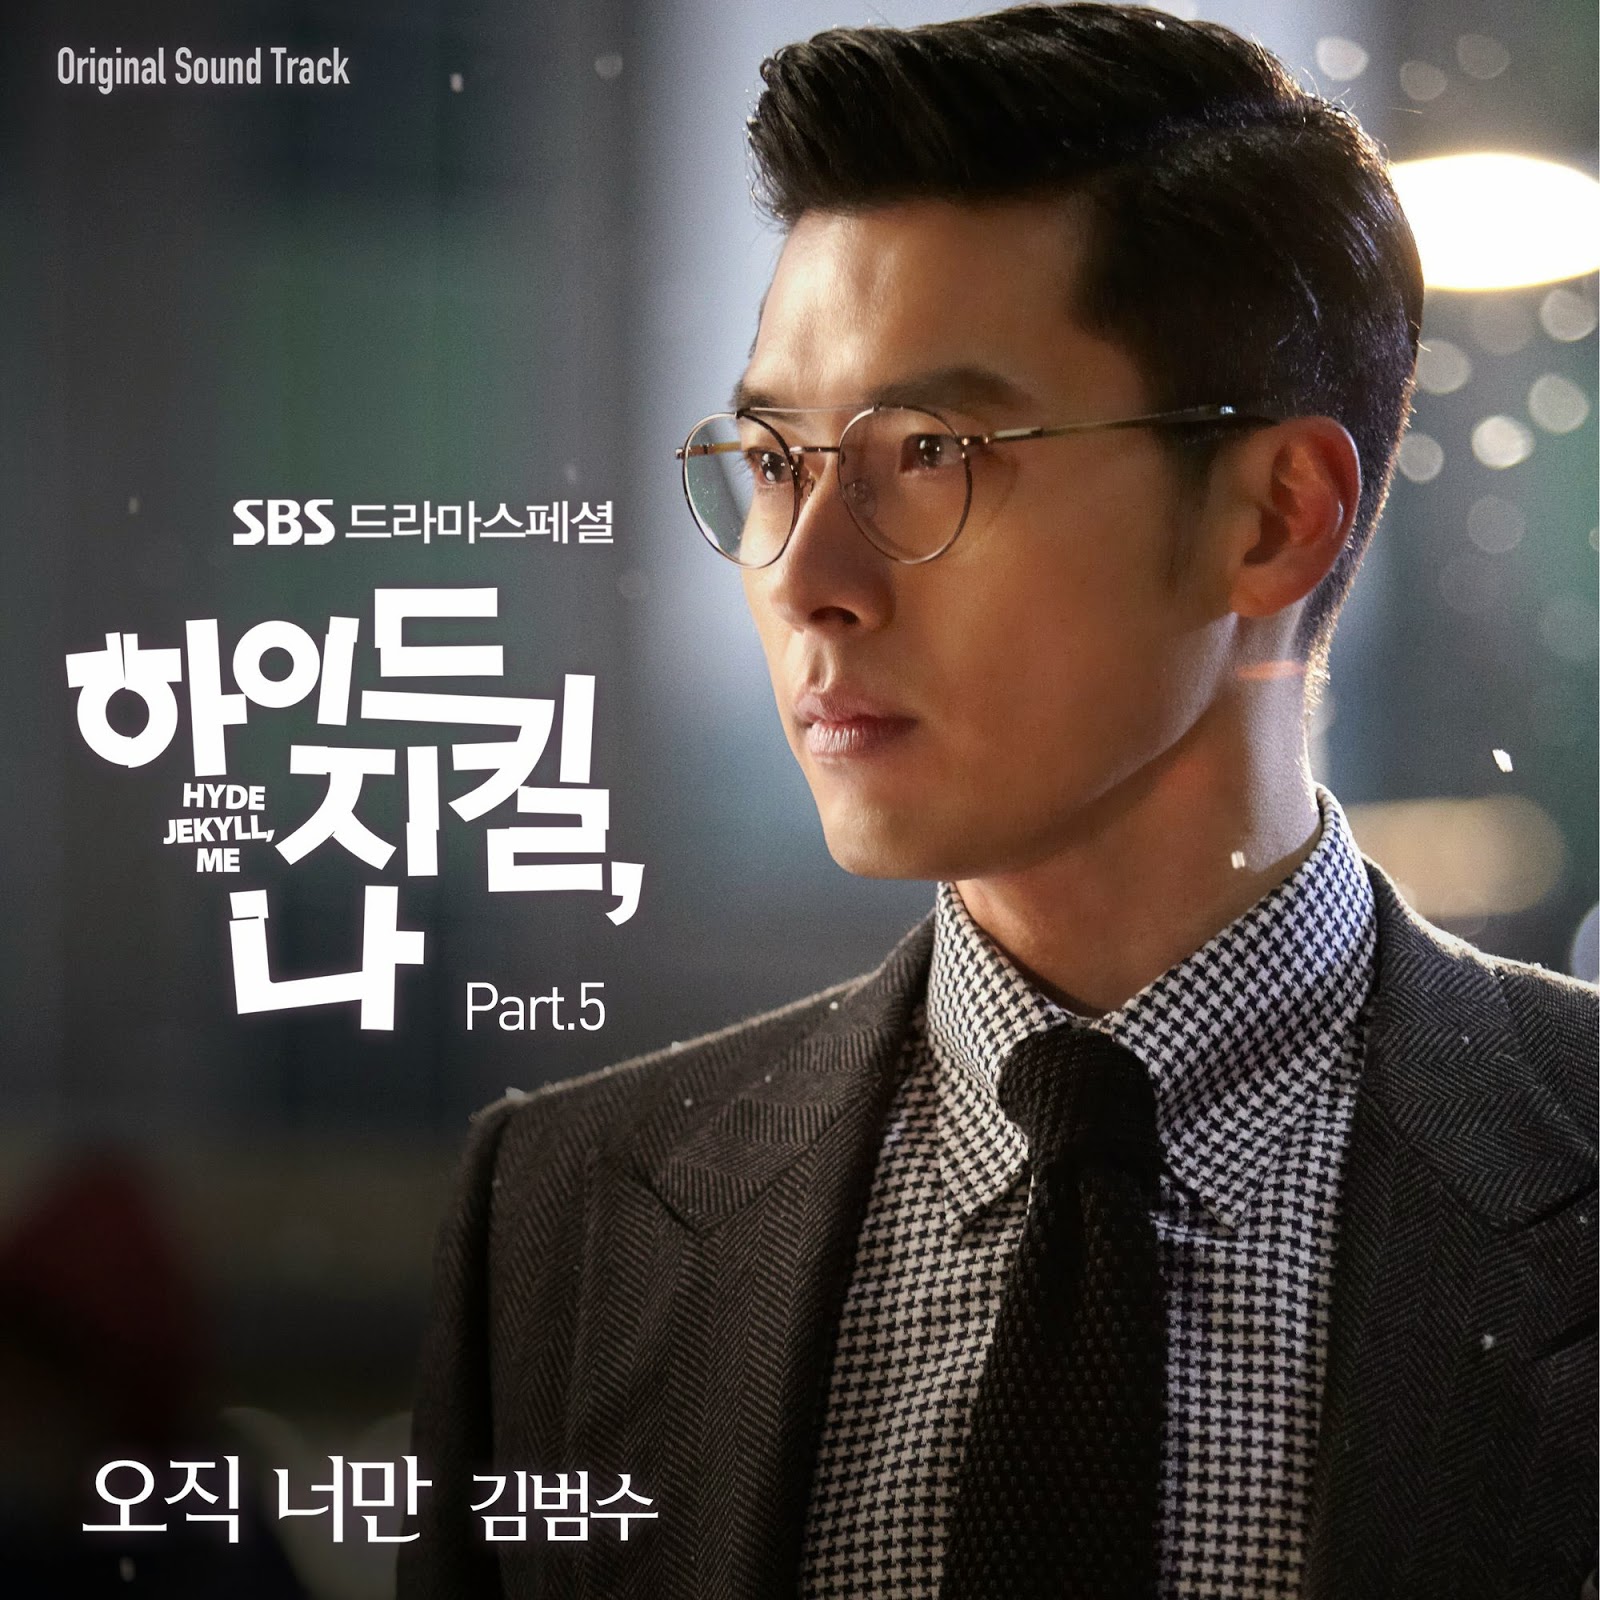 download kim bum soo hyde jekyll me ost part 5 - only you mp3